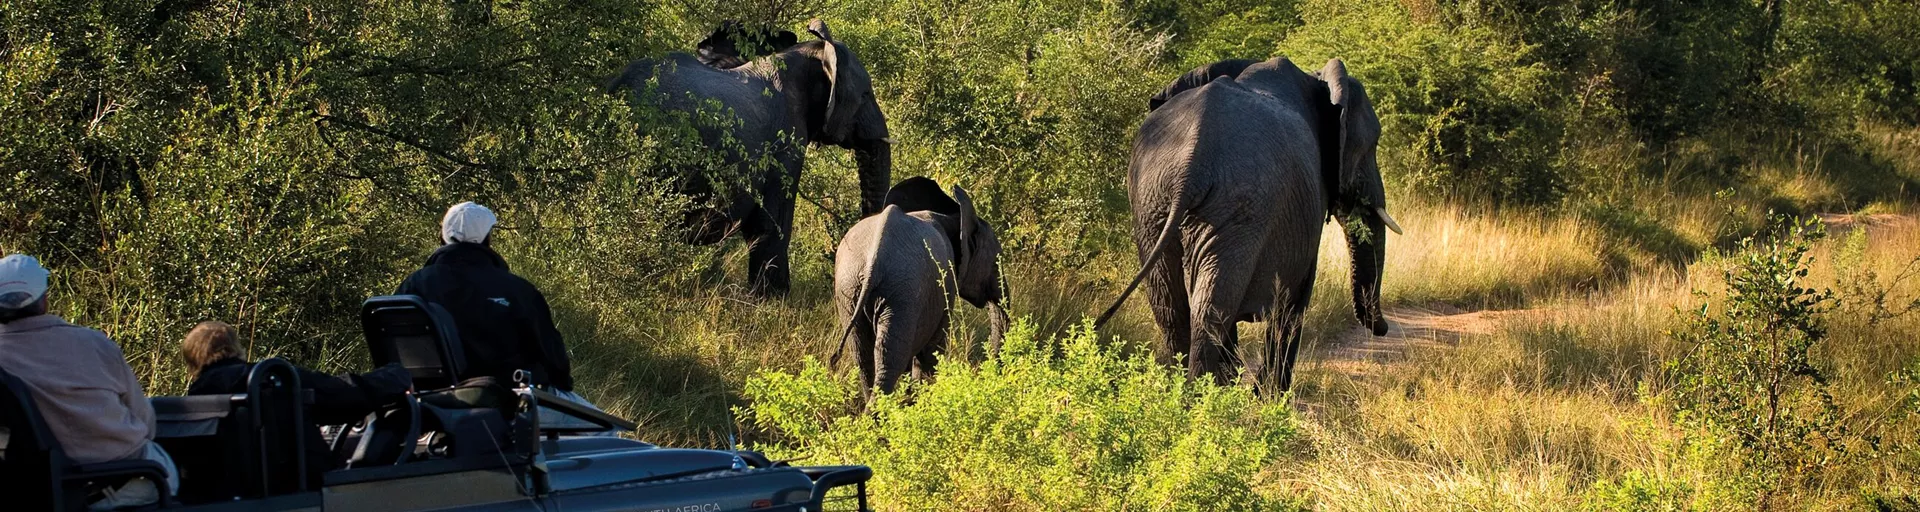 Safari jeep viewing elephants in Kruger National Park in South Africa